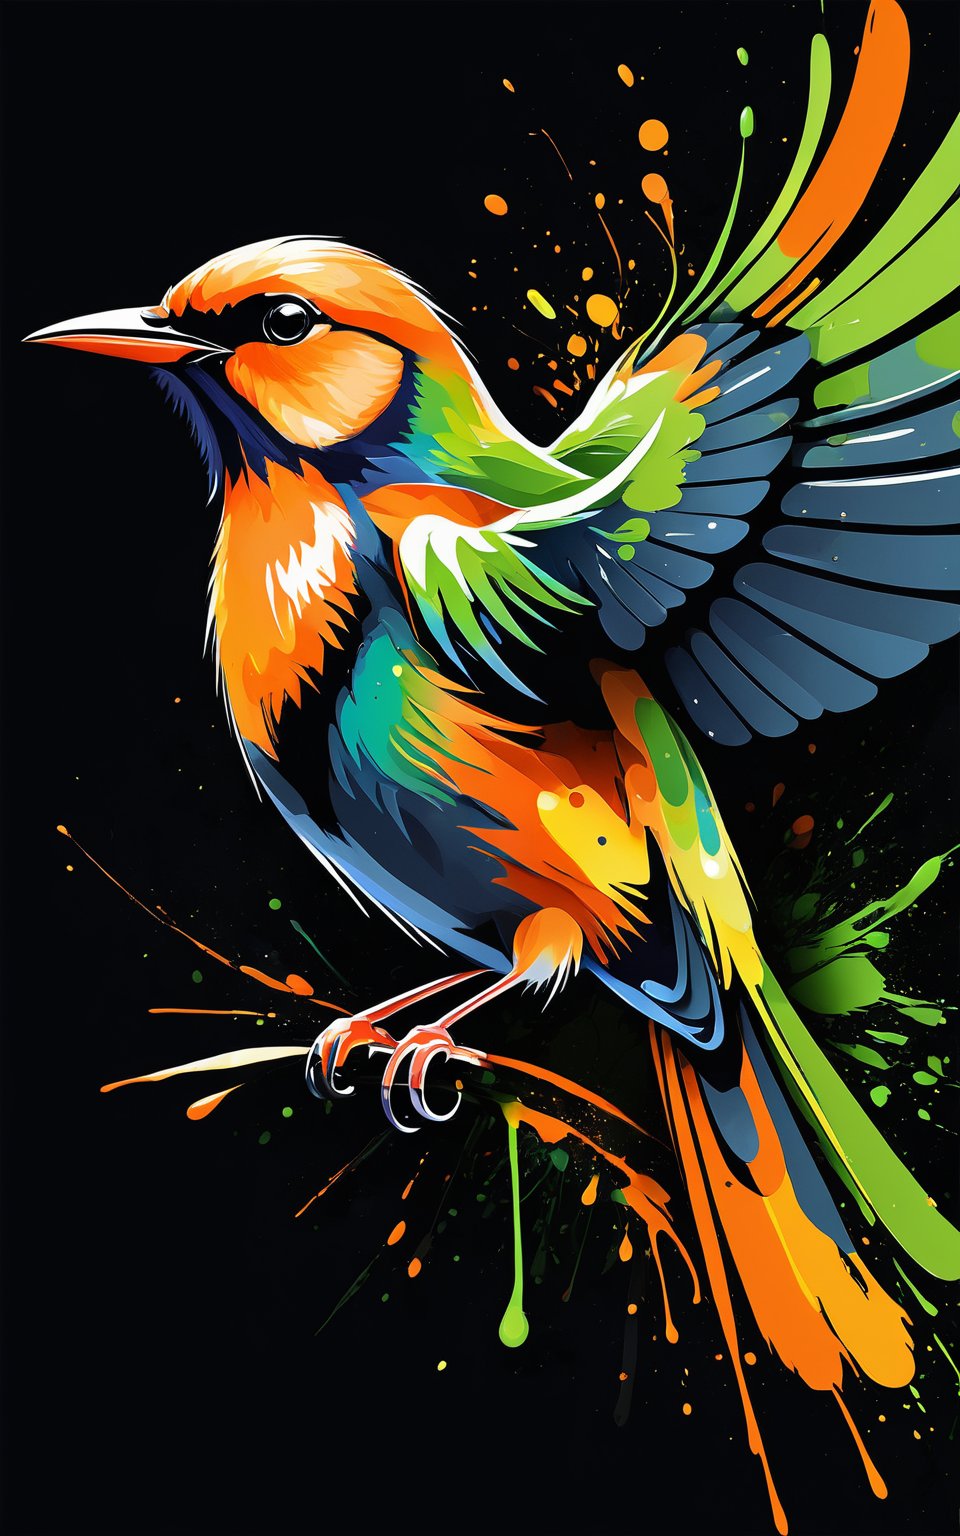 (Artistic bird illustration, high resolution, painted style, colored paint splatters), a [bird] depicted in a painted style with dynamic and vibrant paint splatters. The main colors are [orange] and [green], set against a [black] background. The artwork captures the lively essence of the [bird] through the use of bold paint splatters, creating a visually striking and energetic composition.